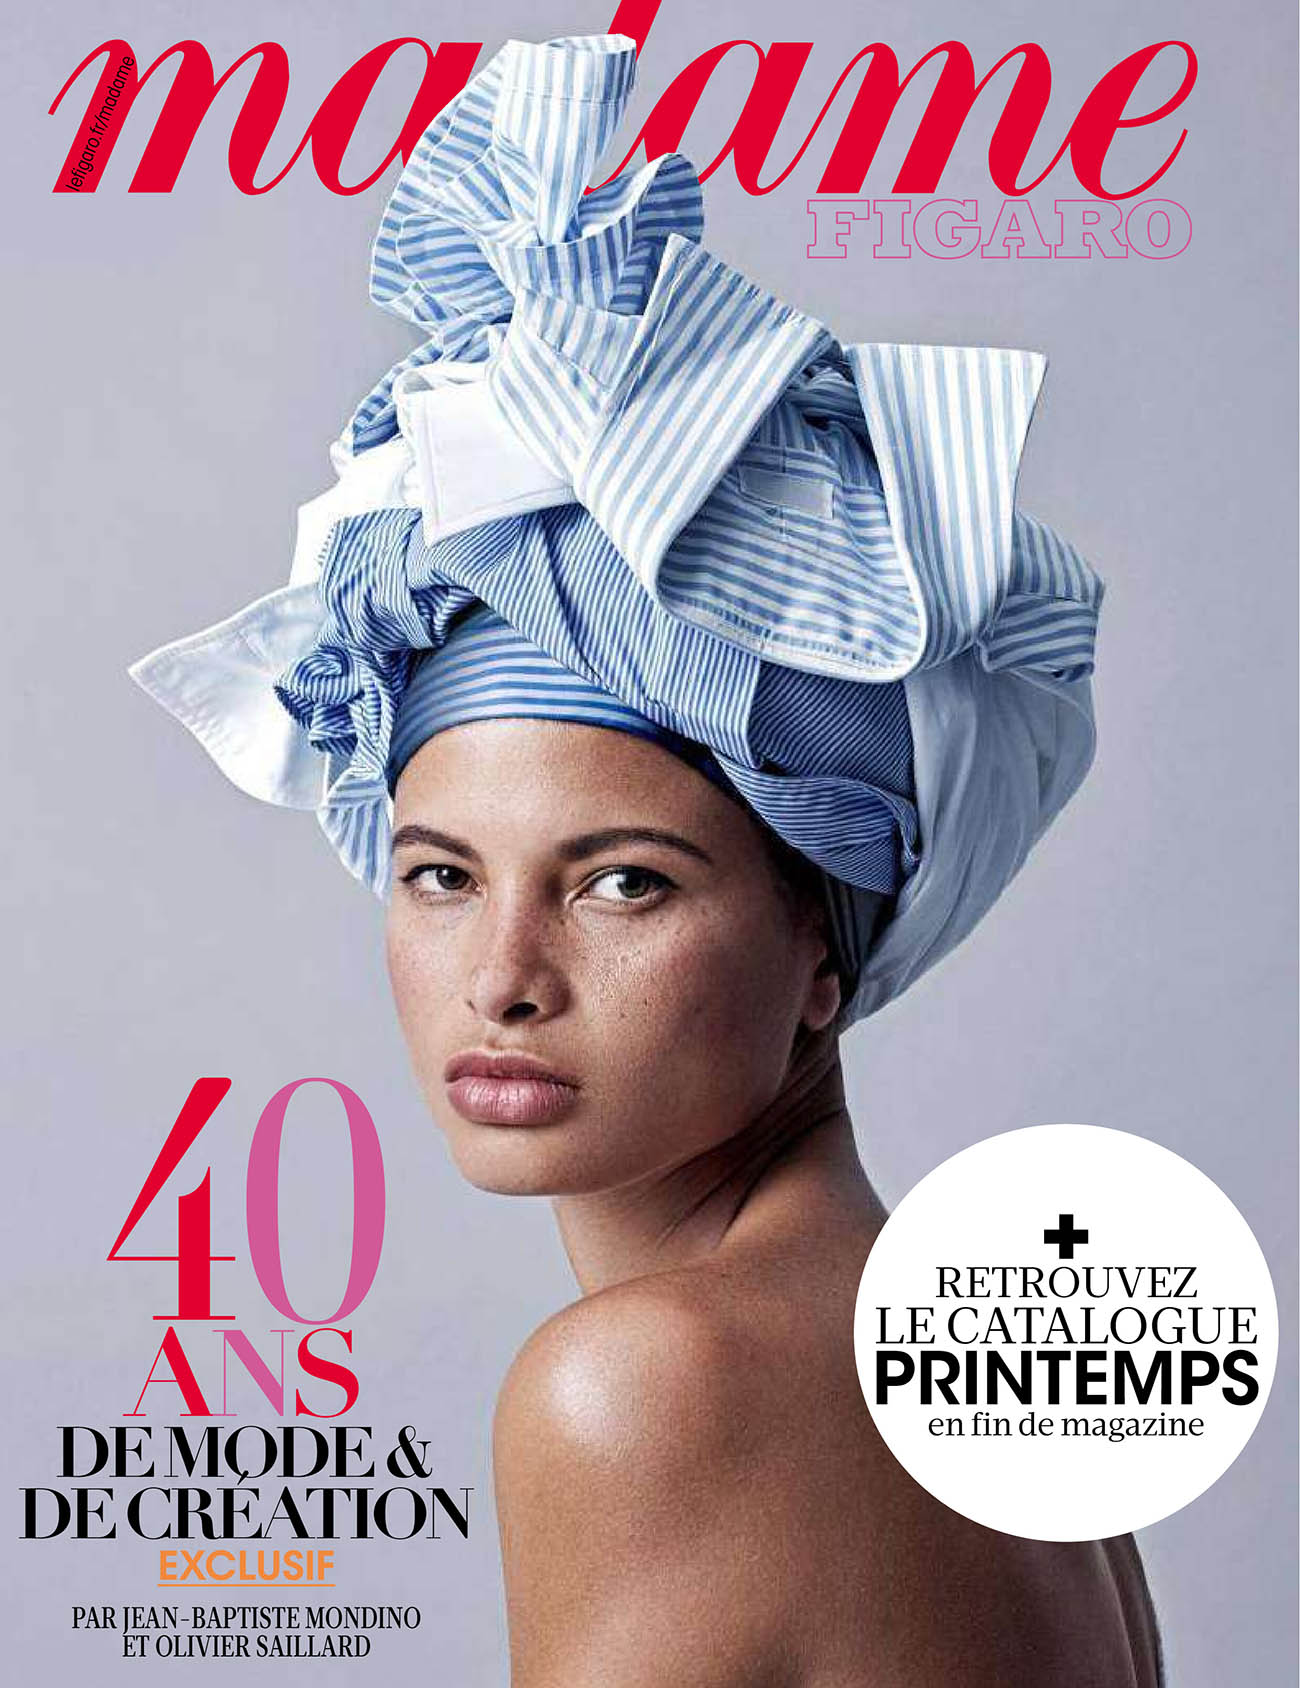 Madame Figaro October 16th, 2020 issue celebrates the 40th anniversary of the magazine